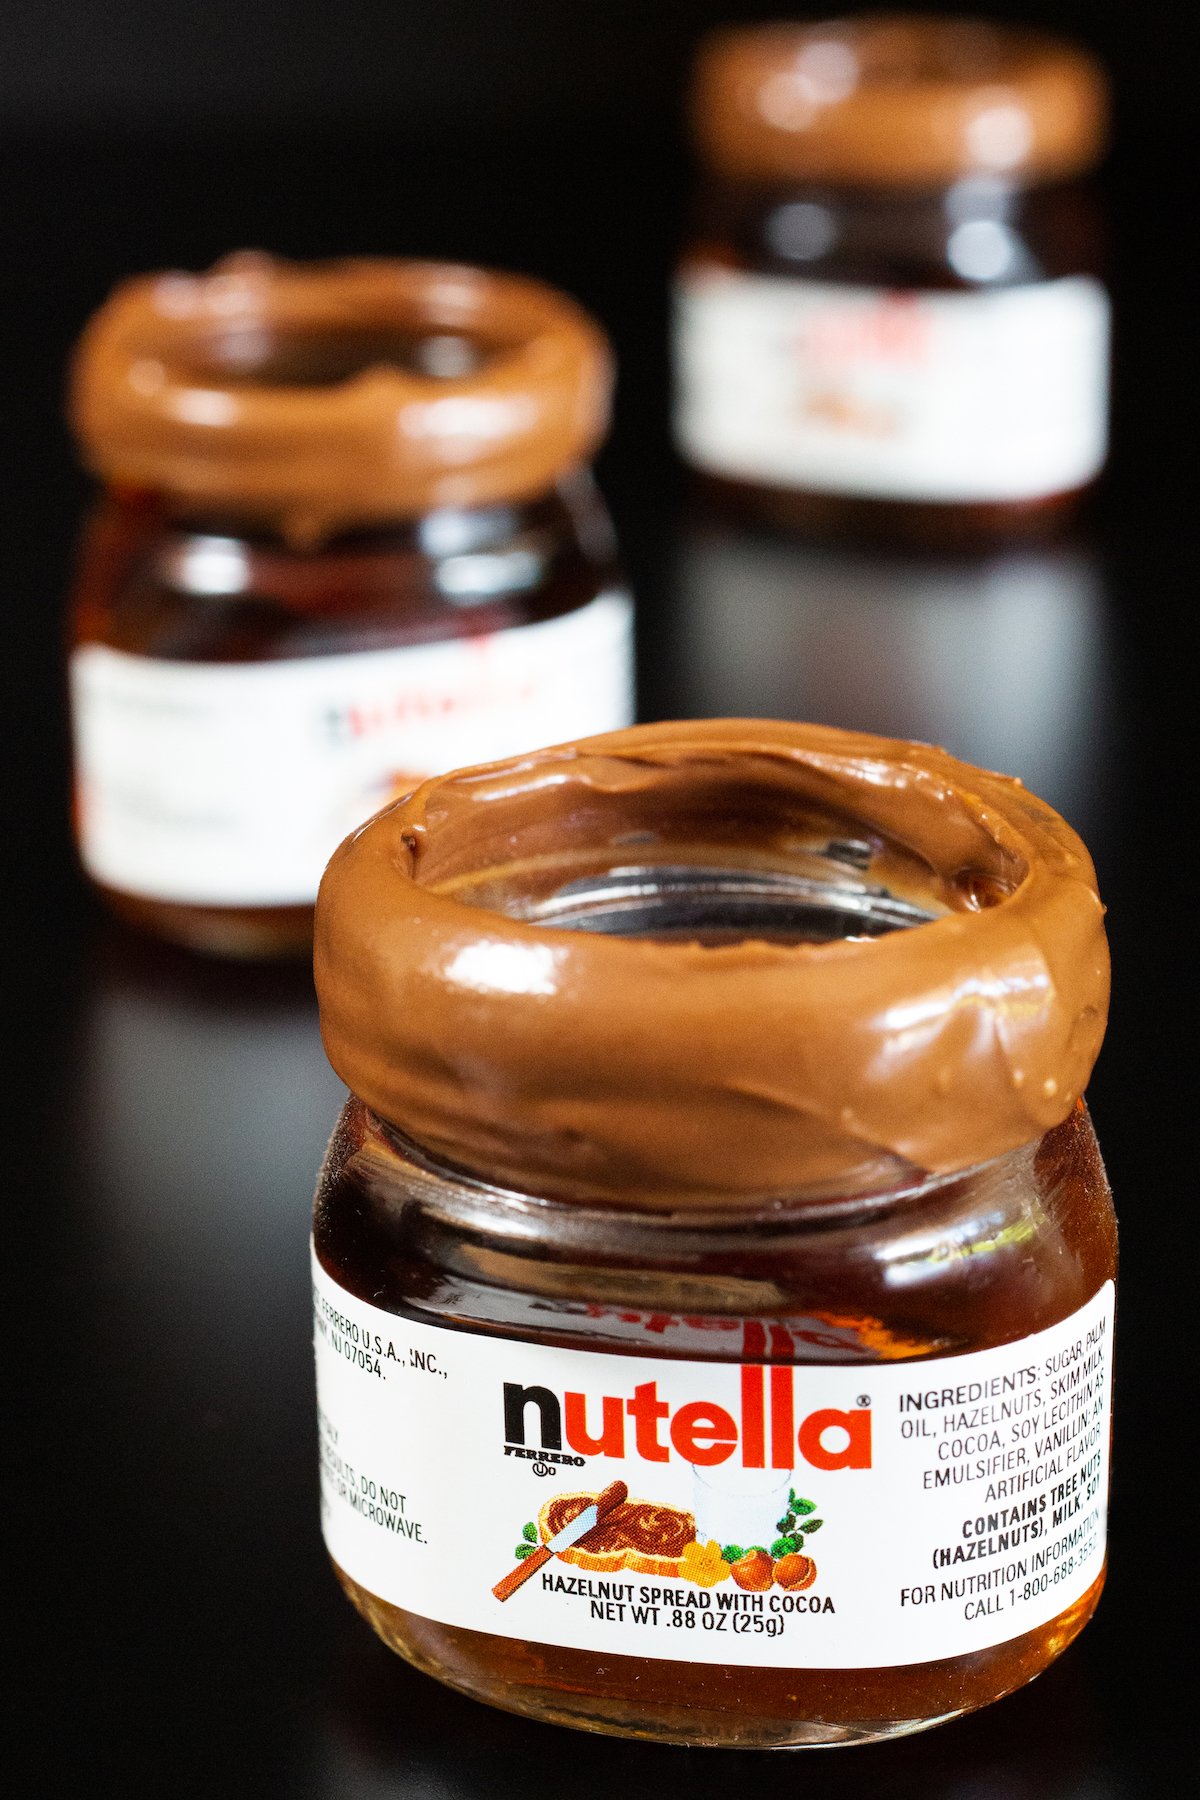 Three miniature Nutella jars filled with shots and rimmed with Nutella spread on a black background.